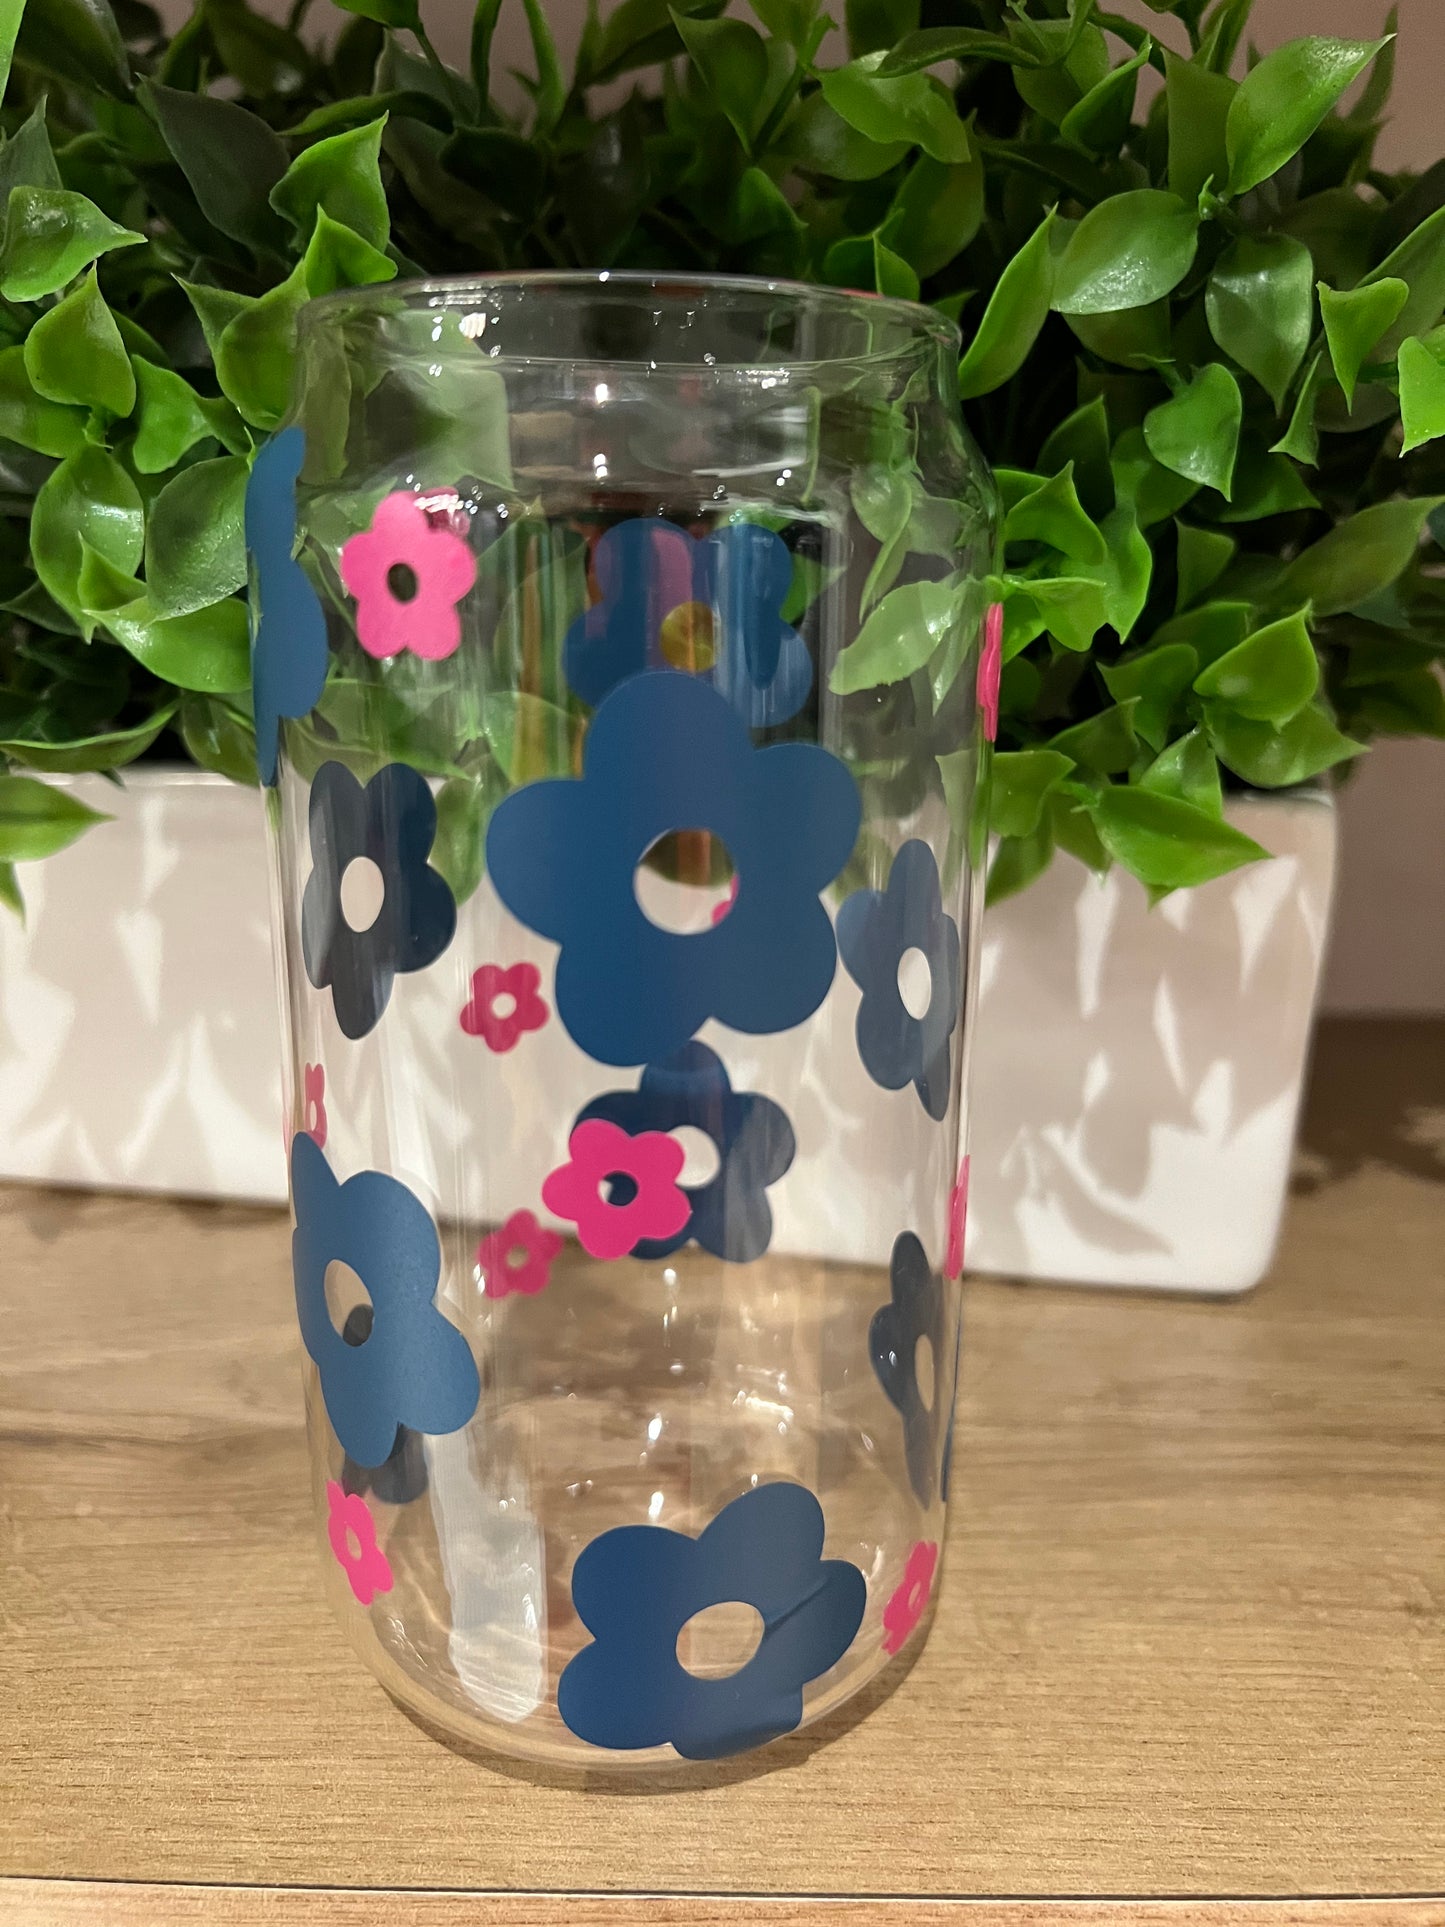 Retro large/small flower glass cans